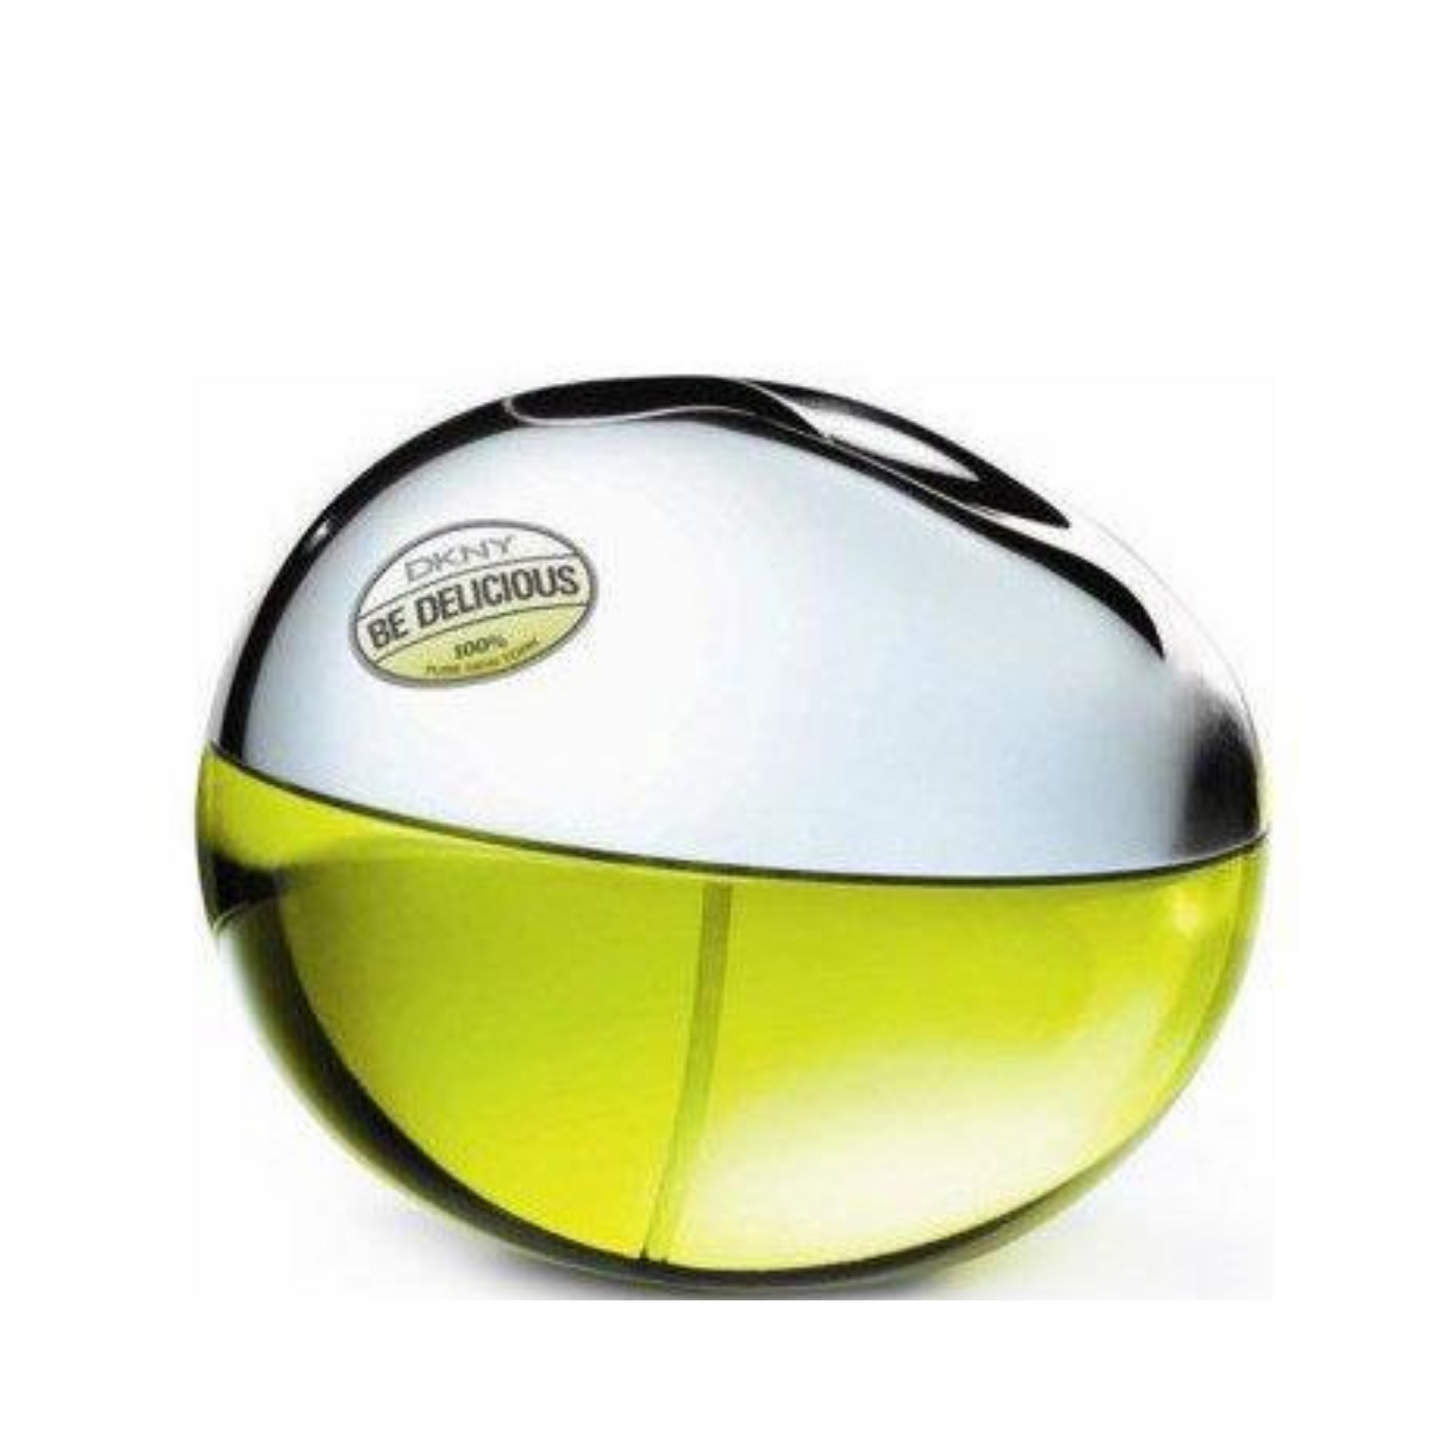 Be Delicious by DKNY type Perfume for Women